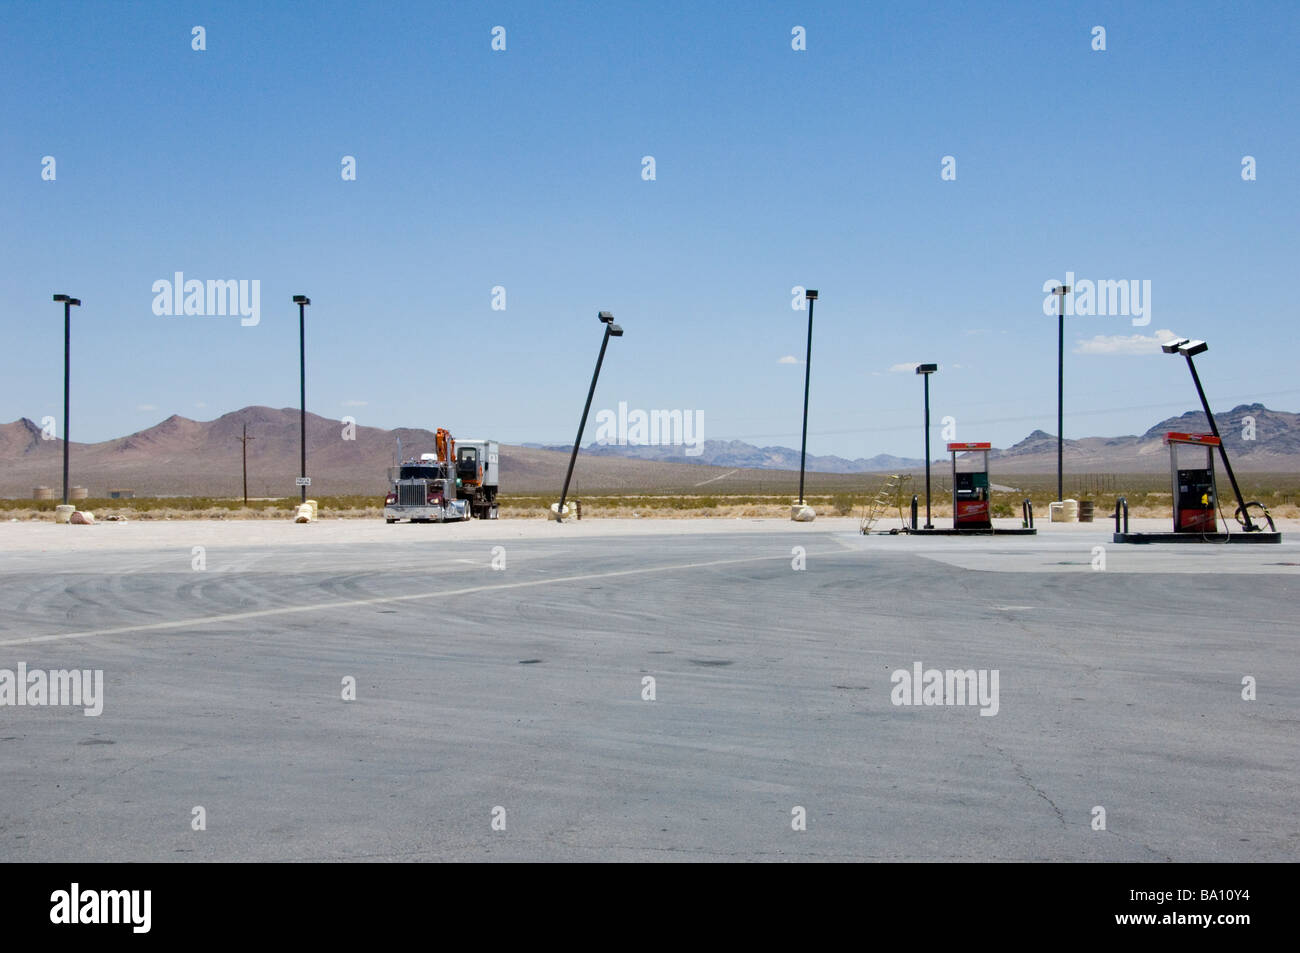 Truck Stop at Gas Station along Route 95, Nevada, USA Stock Photo